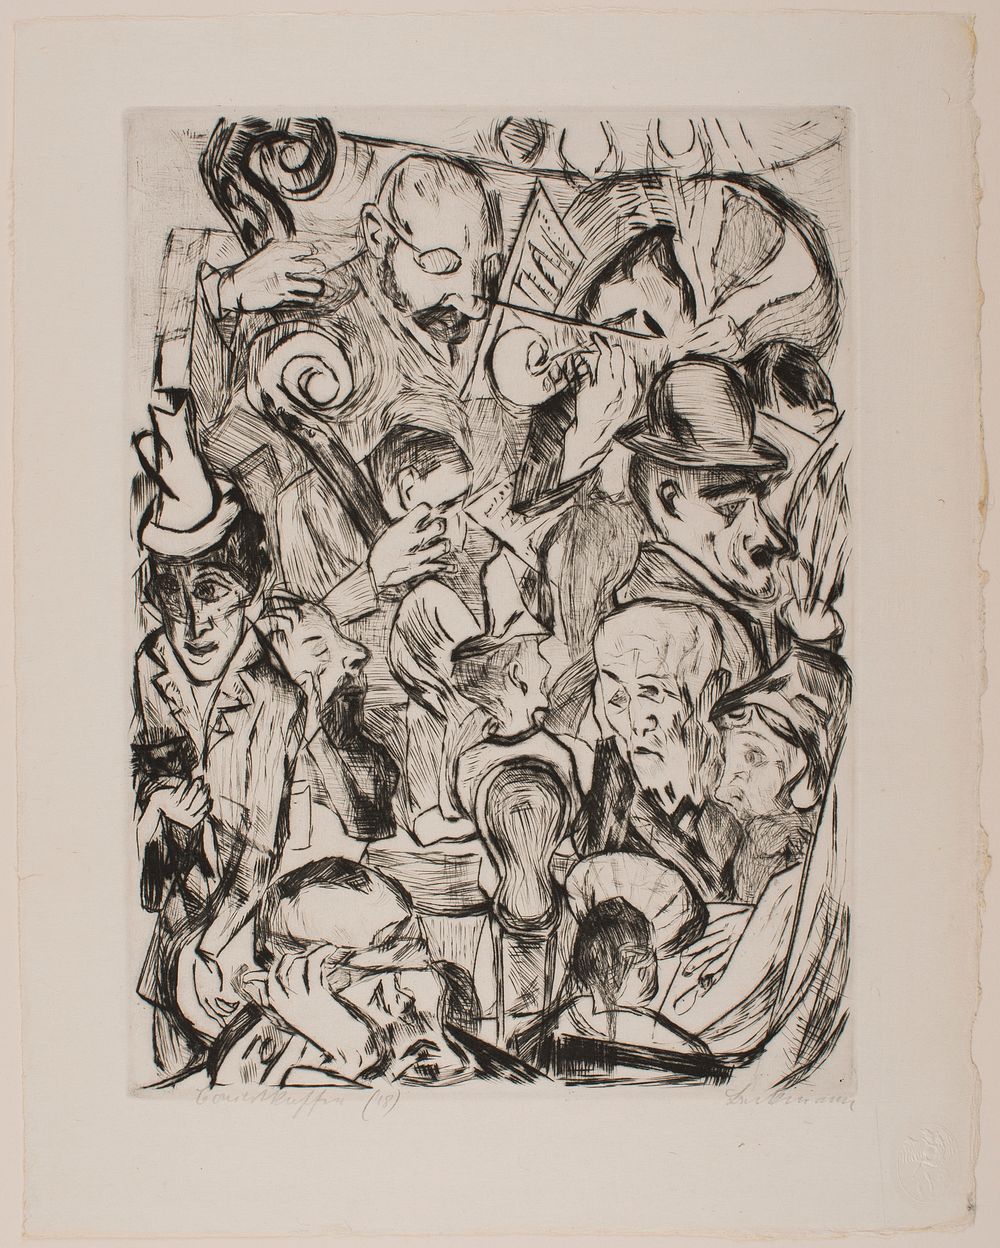 Café Music, plate 9 from the portfolio “Faces” by Max Beckmann